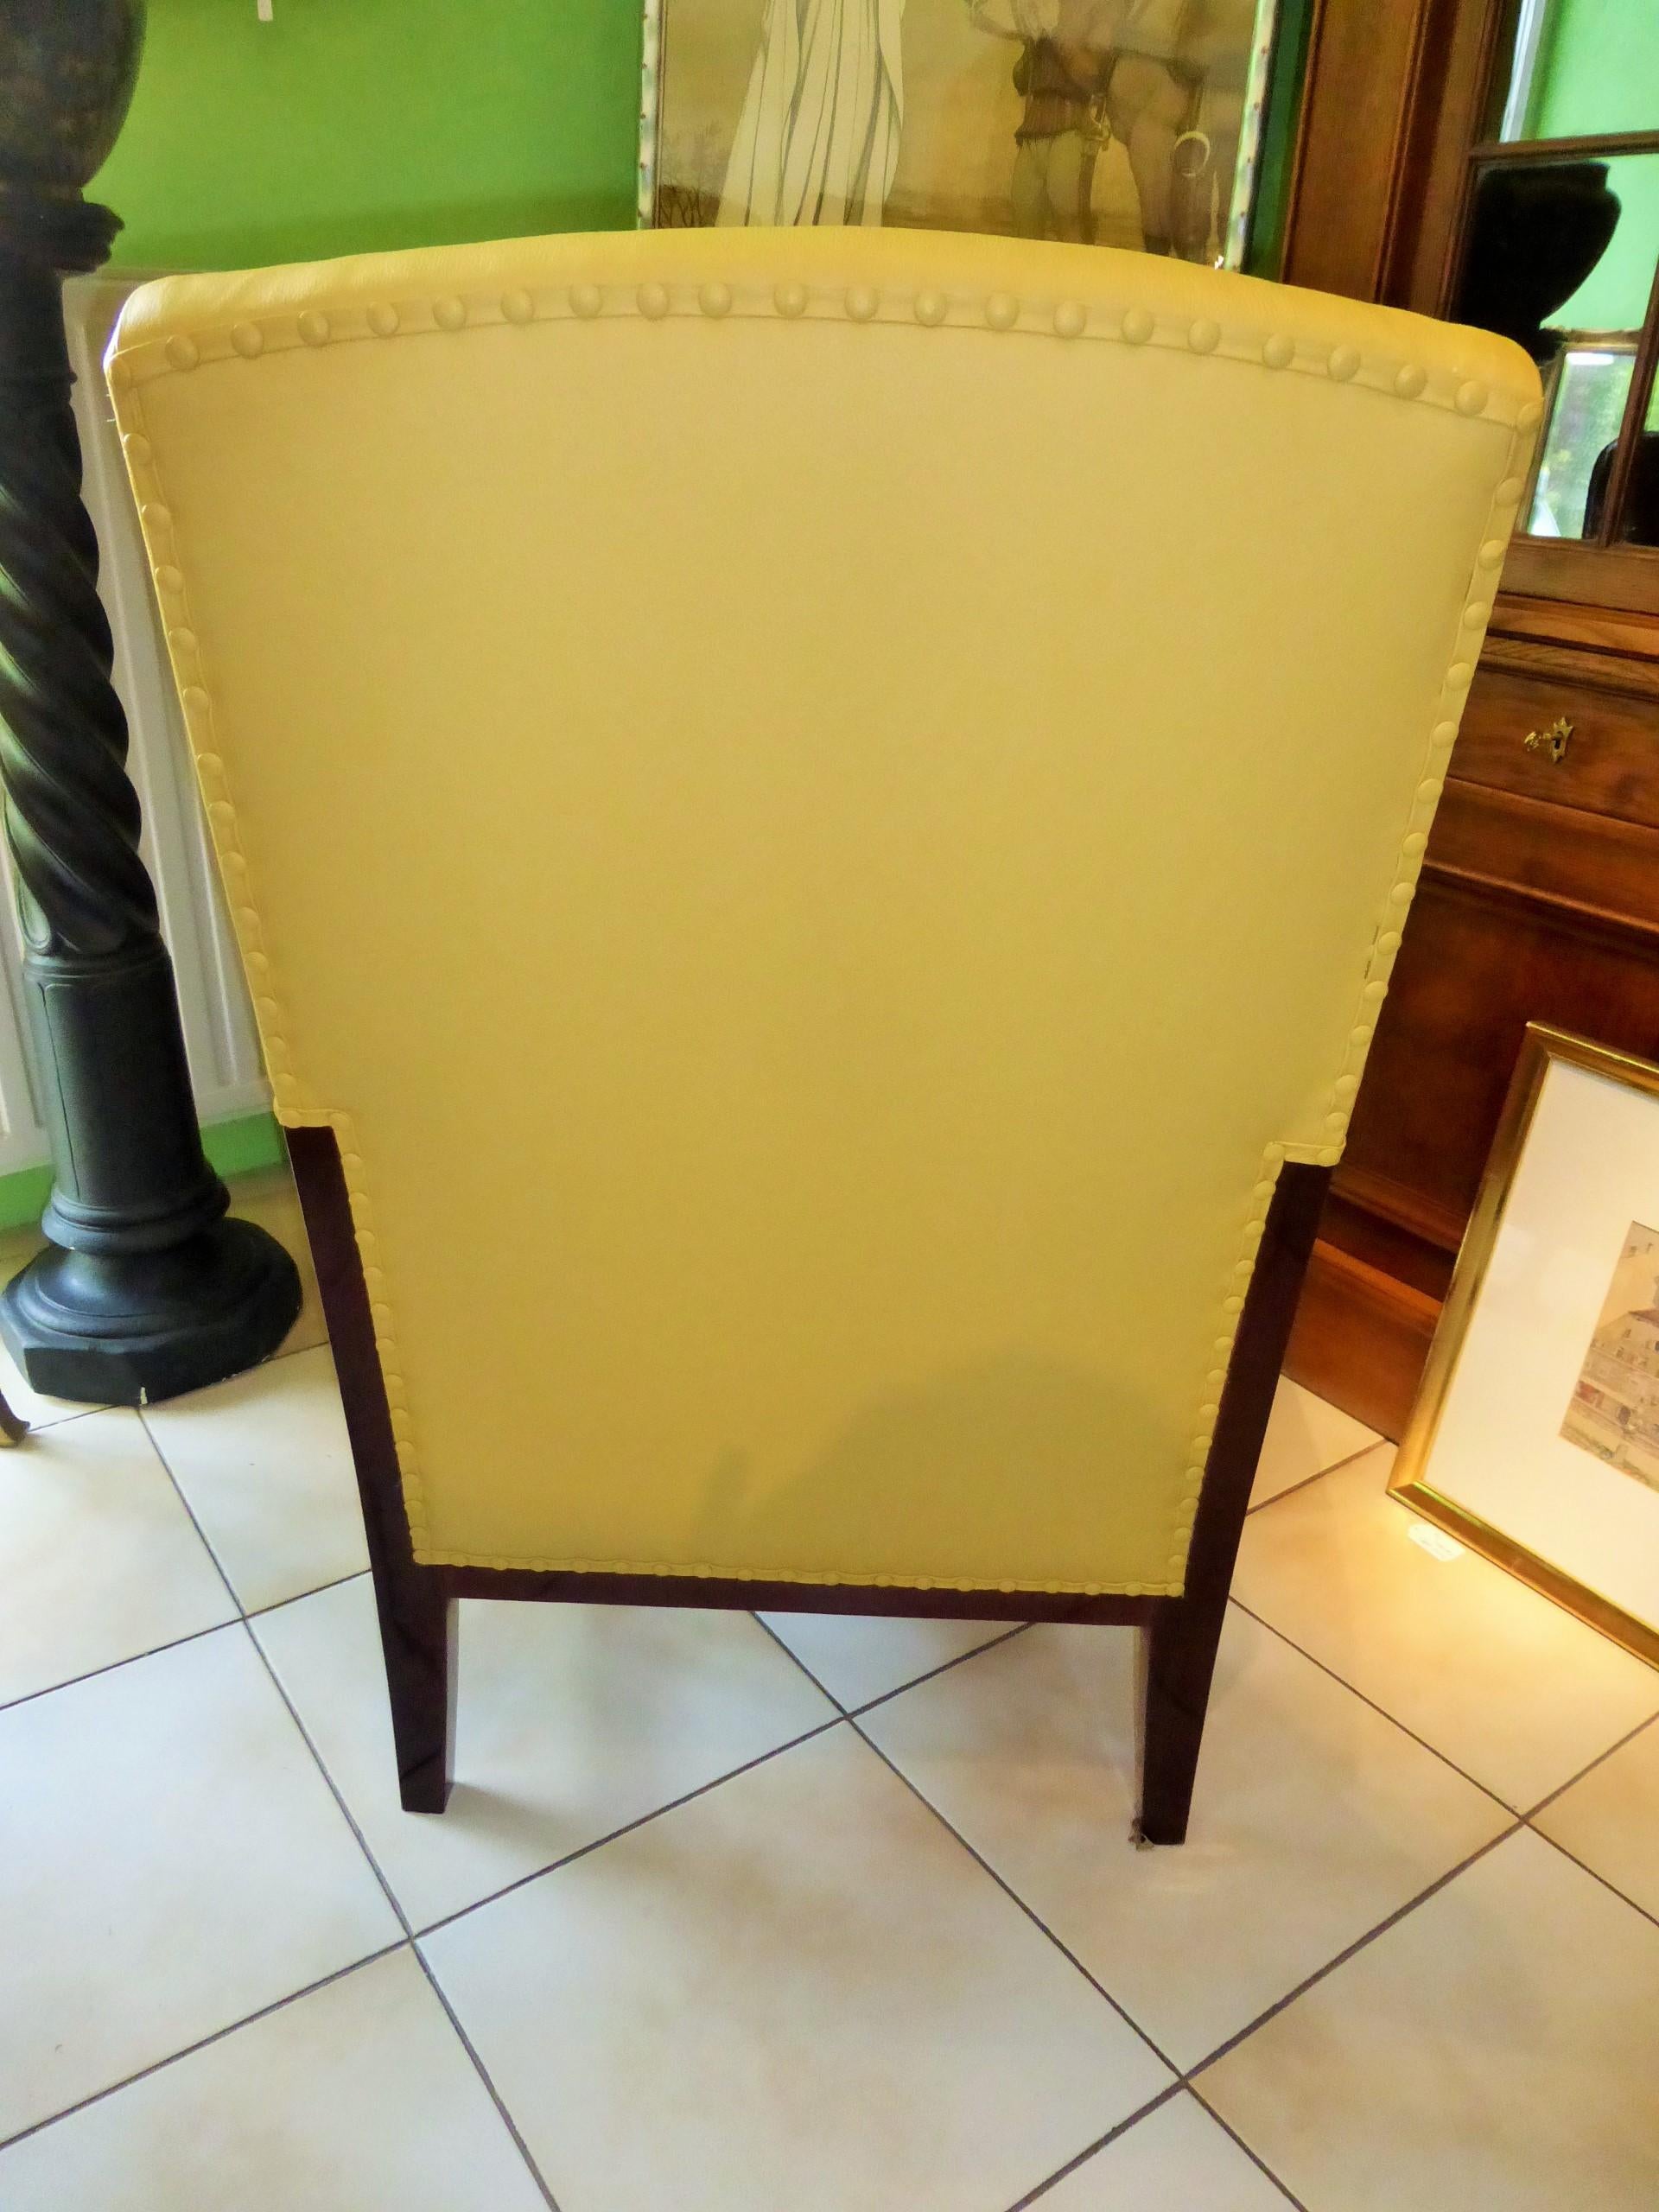 Early 20th Century Art Nouveau Armchairs from 1910 Made of Mahogany with Yellow Leather For Sale